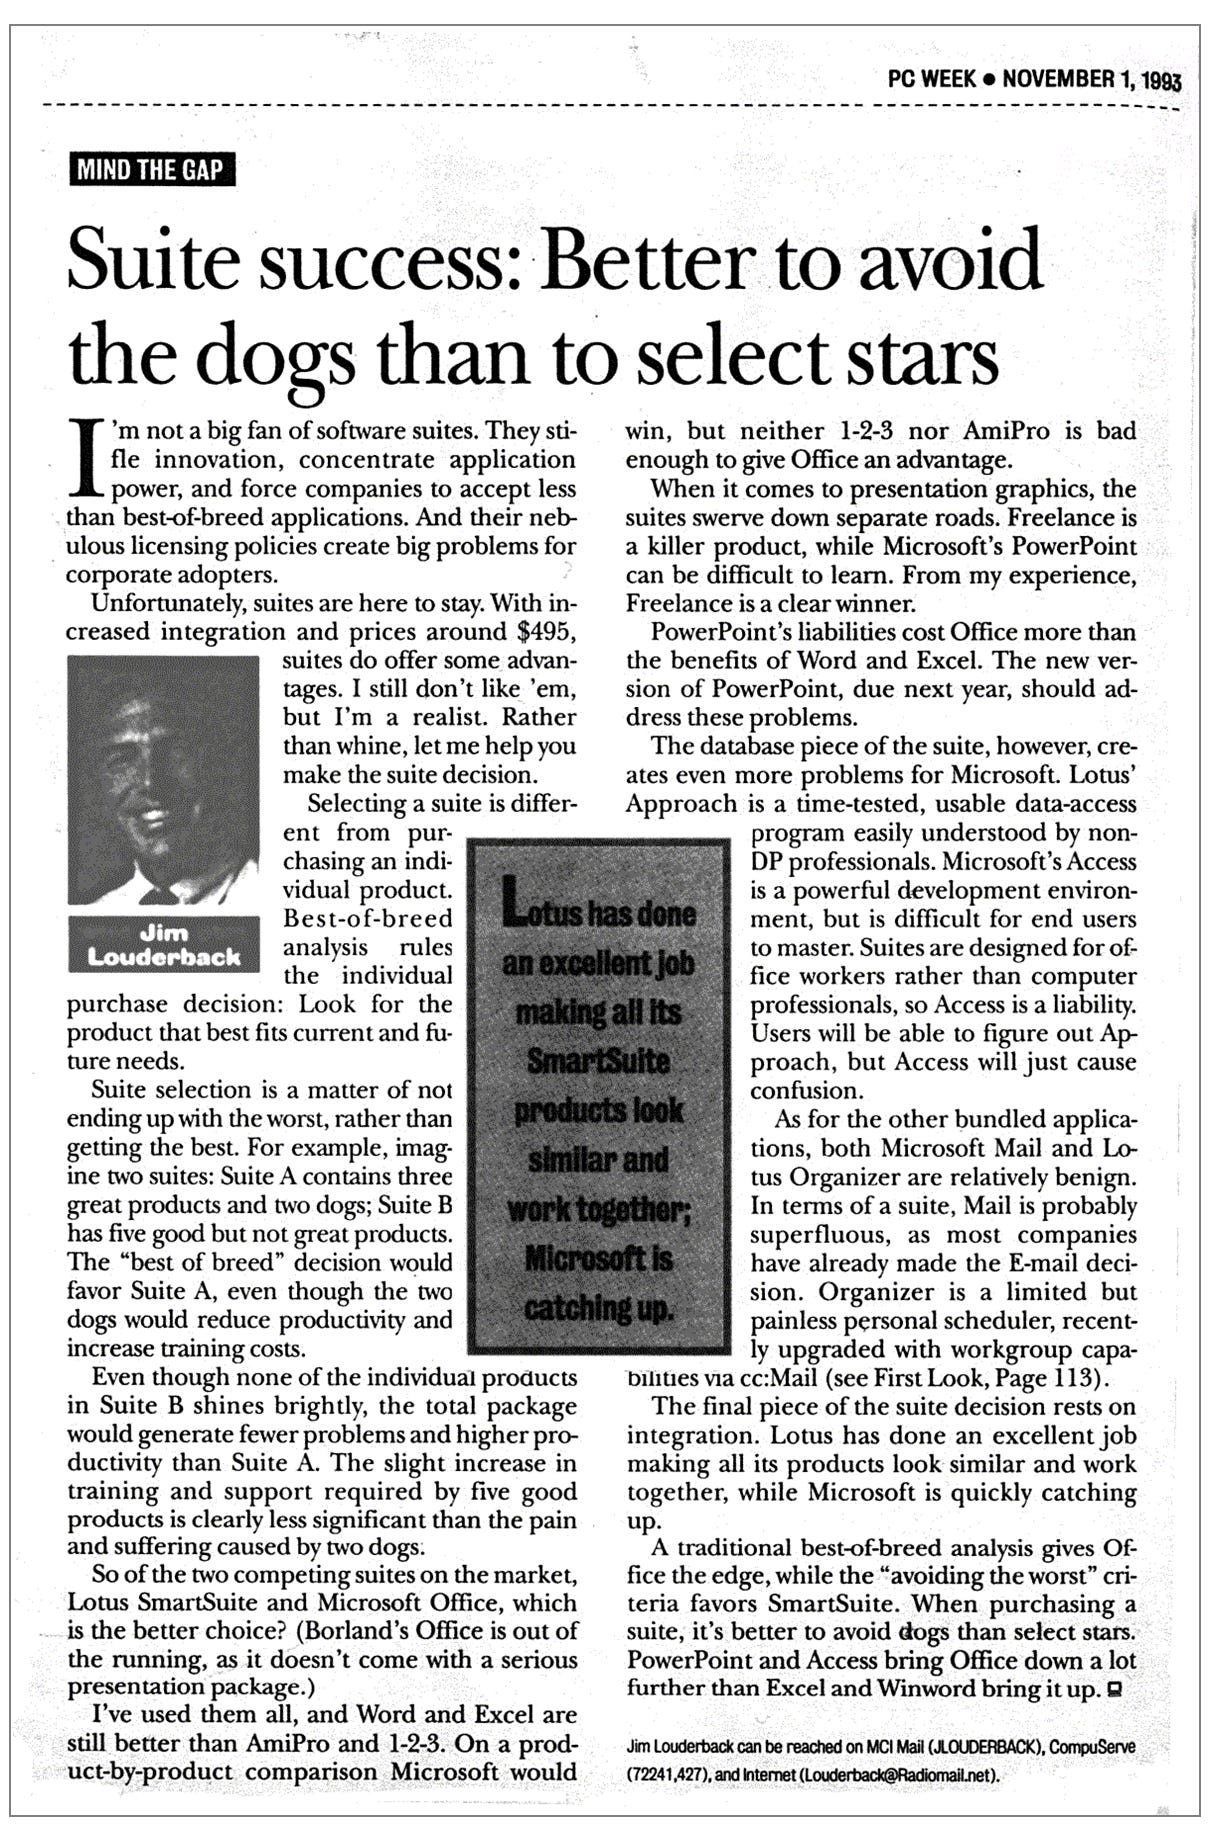 Scanned article "Suite Success: Better to avoid the dogs than to Select Stars"